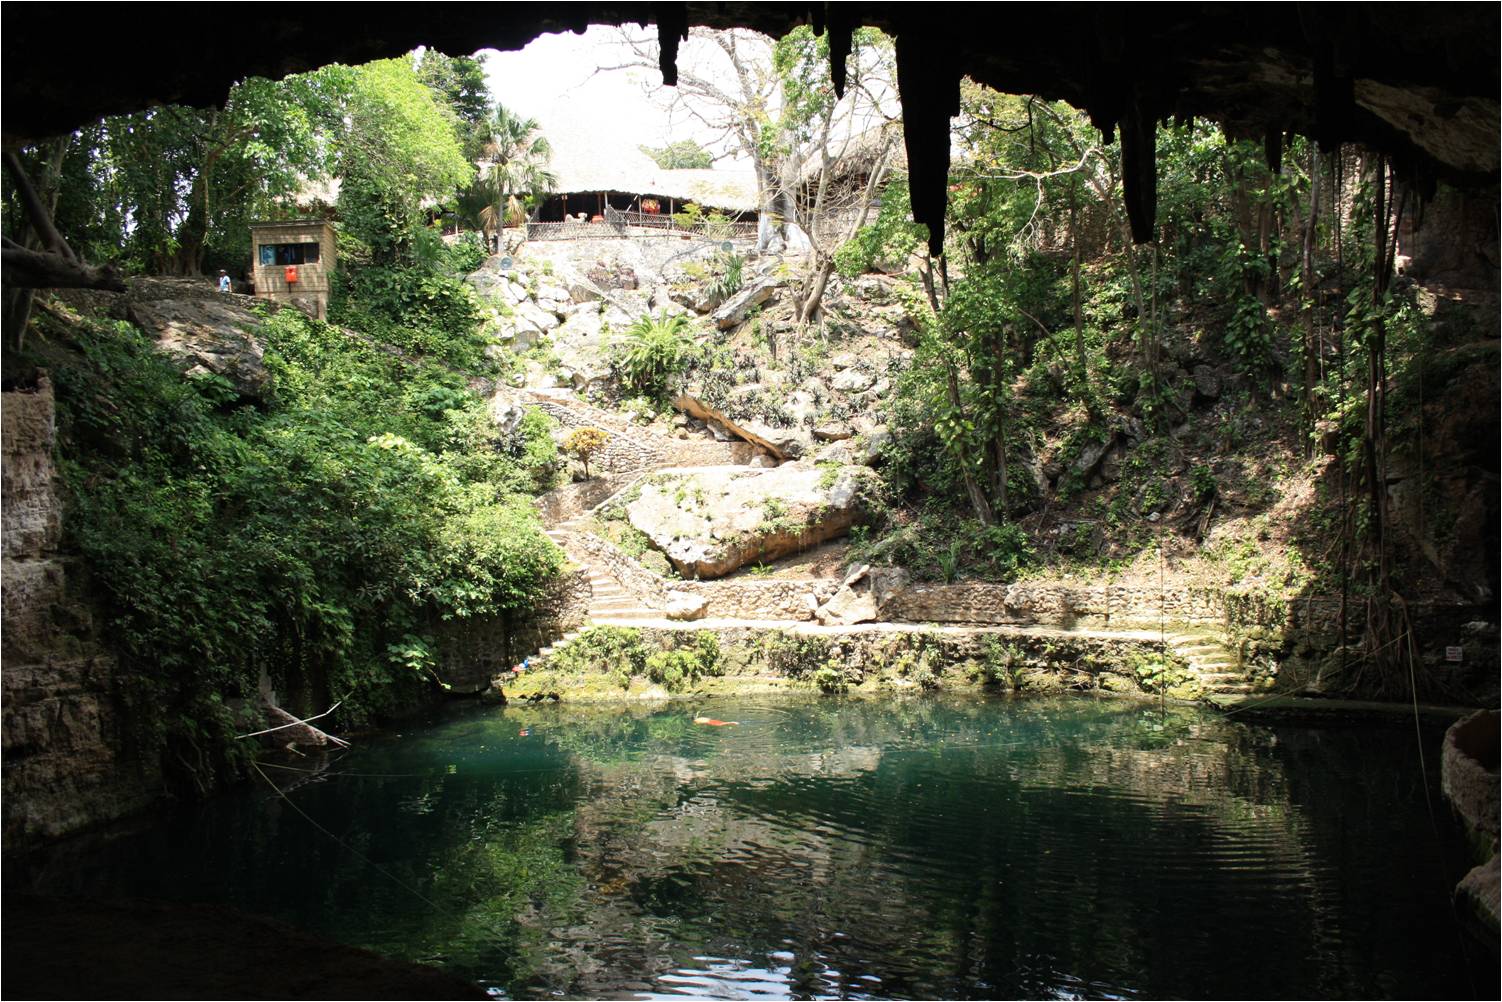 Peaceful Cenote Zaci in the middle of town